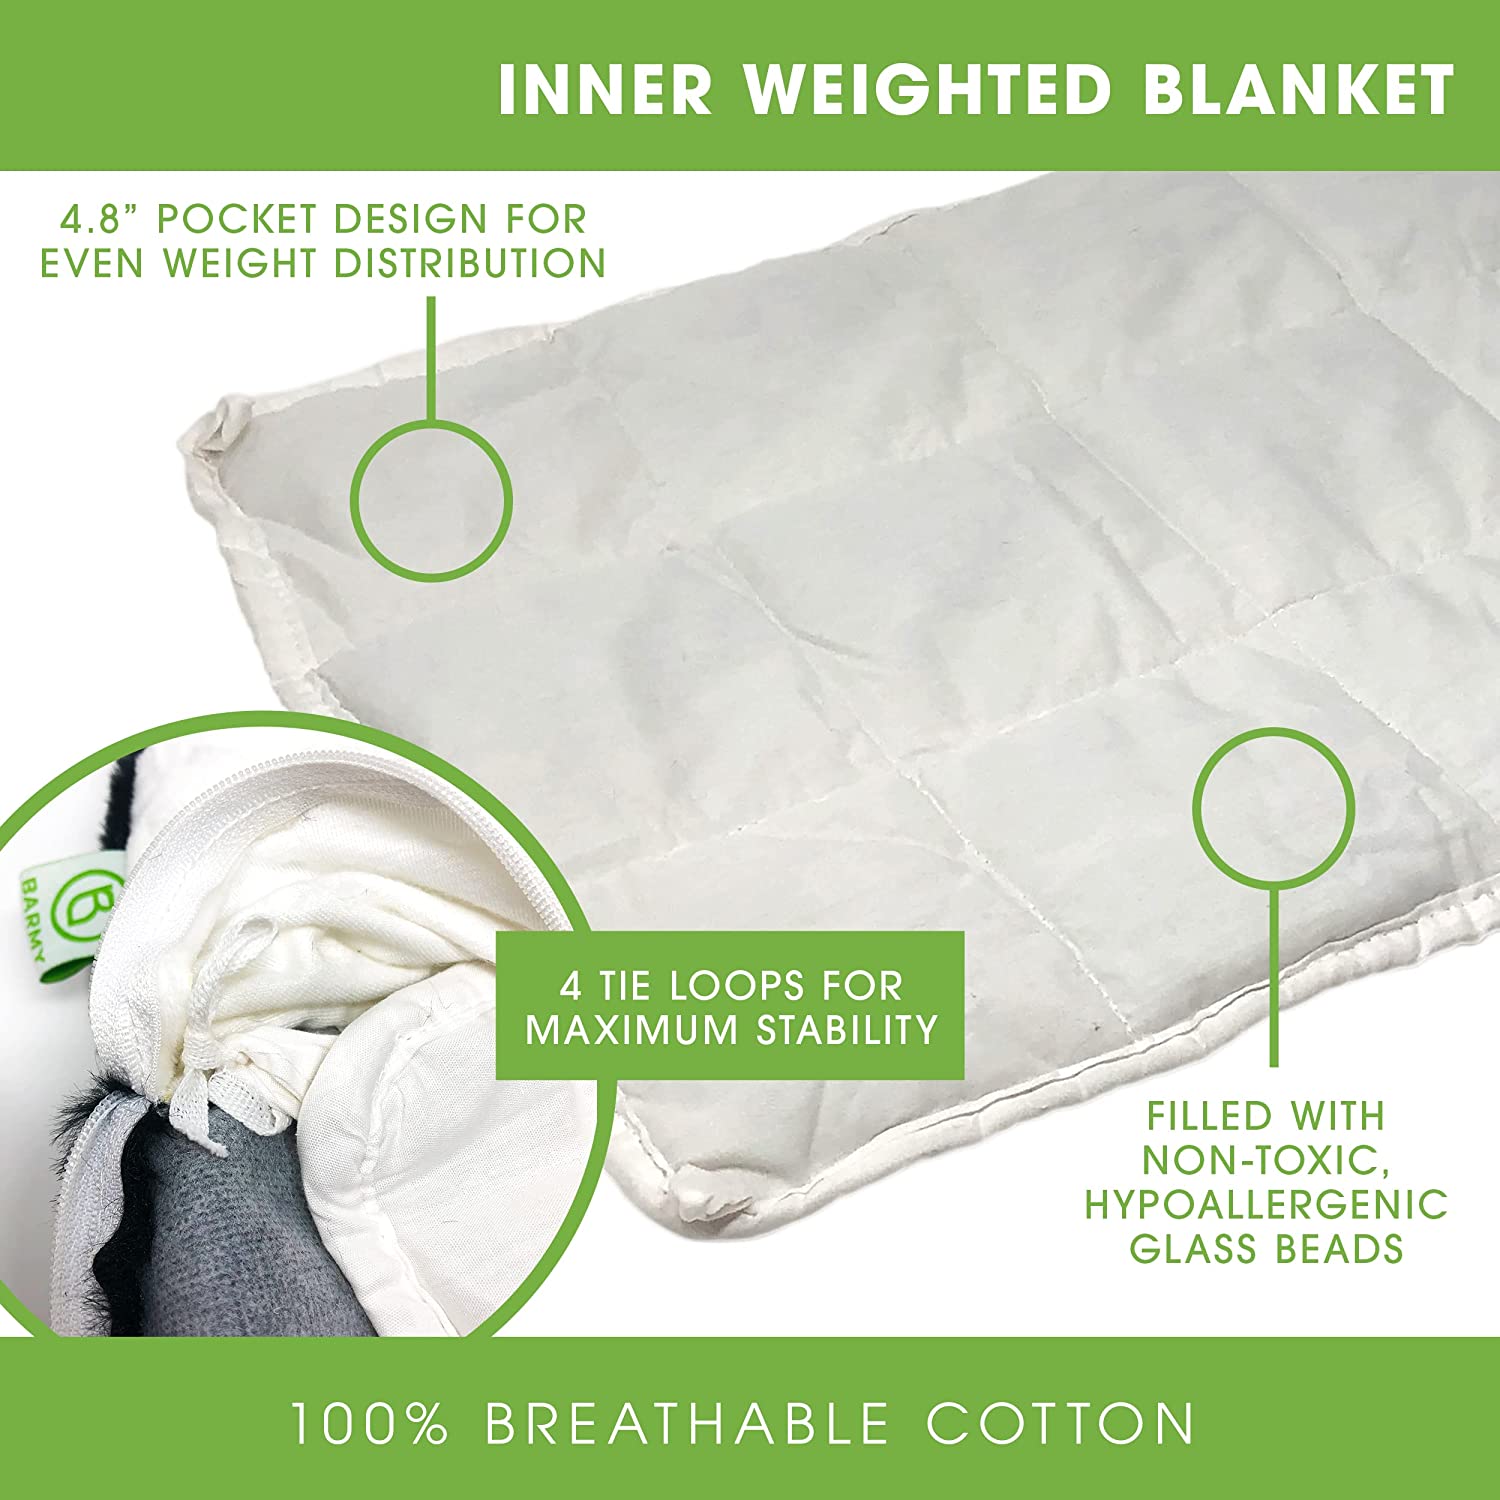 A picture that demonstrates what the inside of the Barmy Weighted Lap Animals look like. The text reads: Inner Weighted Blanket; 4.8" pocket design for even distribution; 4 tie loops for maximum stability; Filled with non-toxic hypoallergenic glass beads; 100% breathable cotton.